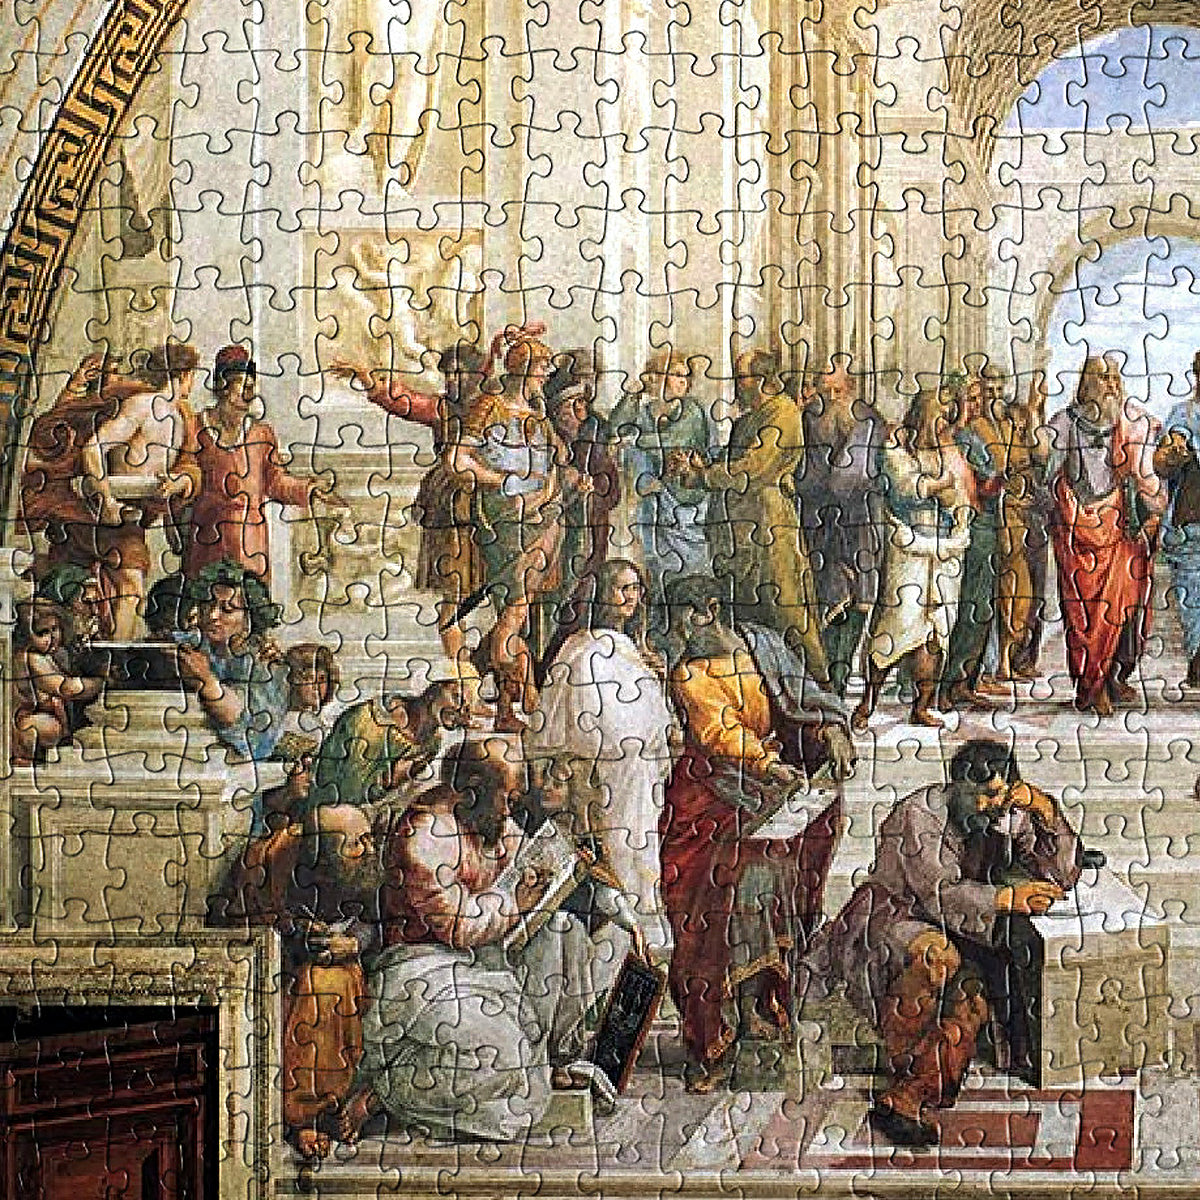 Eurographics presents an incredible 1000-piece jigsaw puzzle that brings Raphael's School of Athens painting to life.